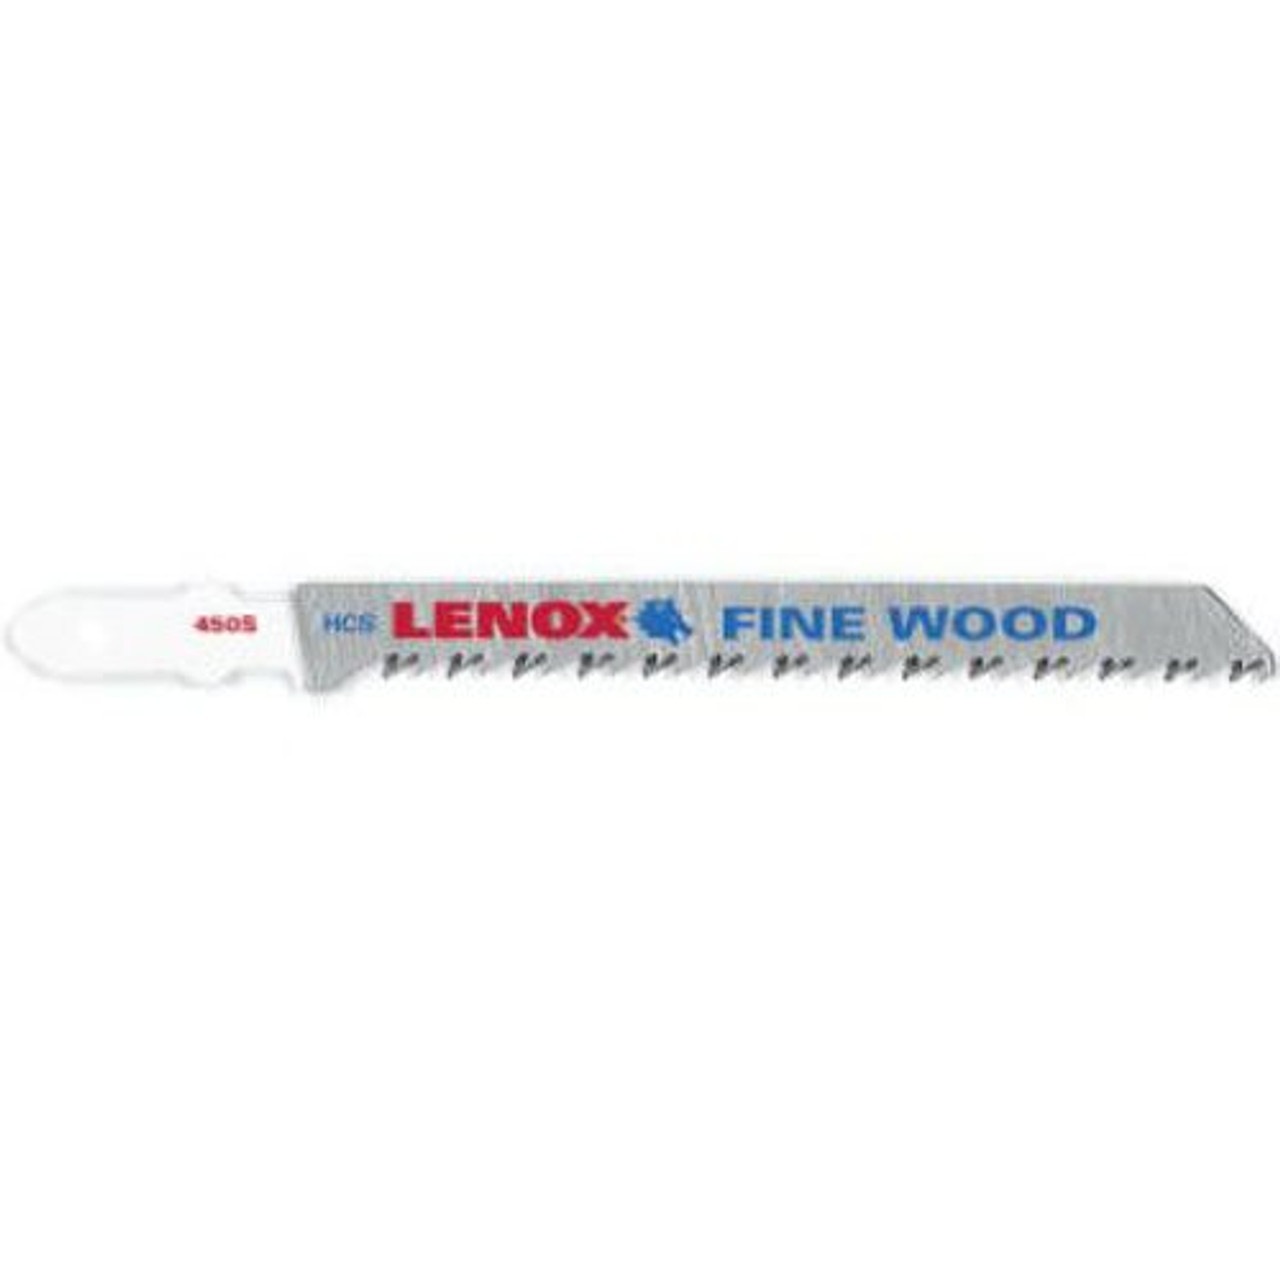 Lenox Tools 20752CT450S T-Shank High Carbon Steel Fine Wood Jig Saw Blade, 4-Inch x 5/16-Inch 10TPI, 2-Pack